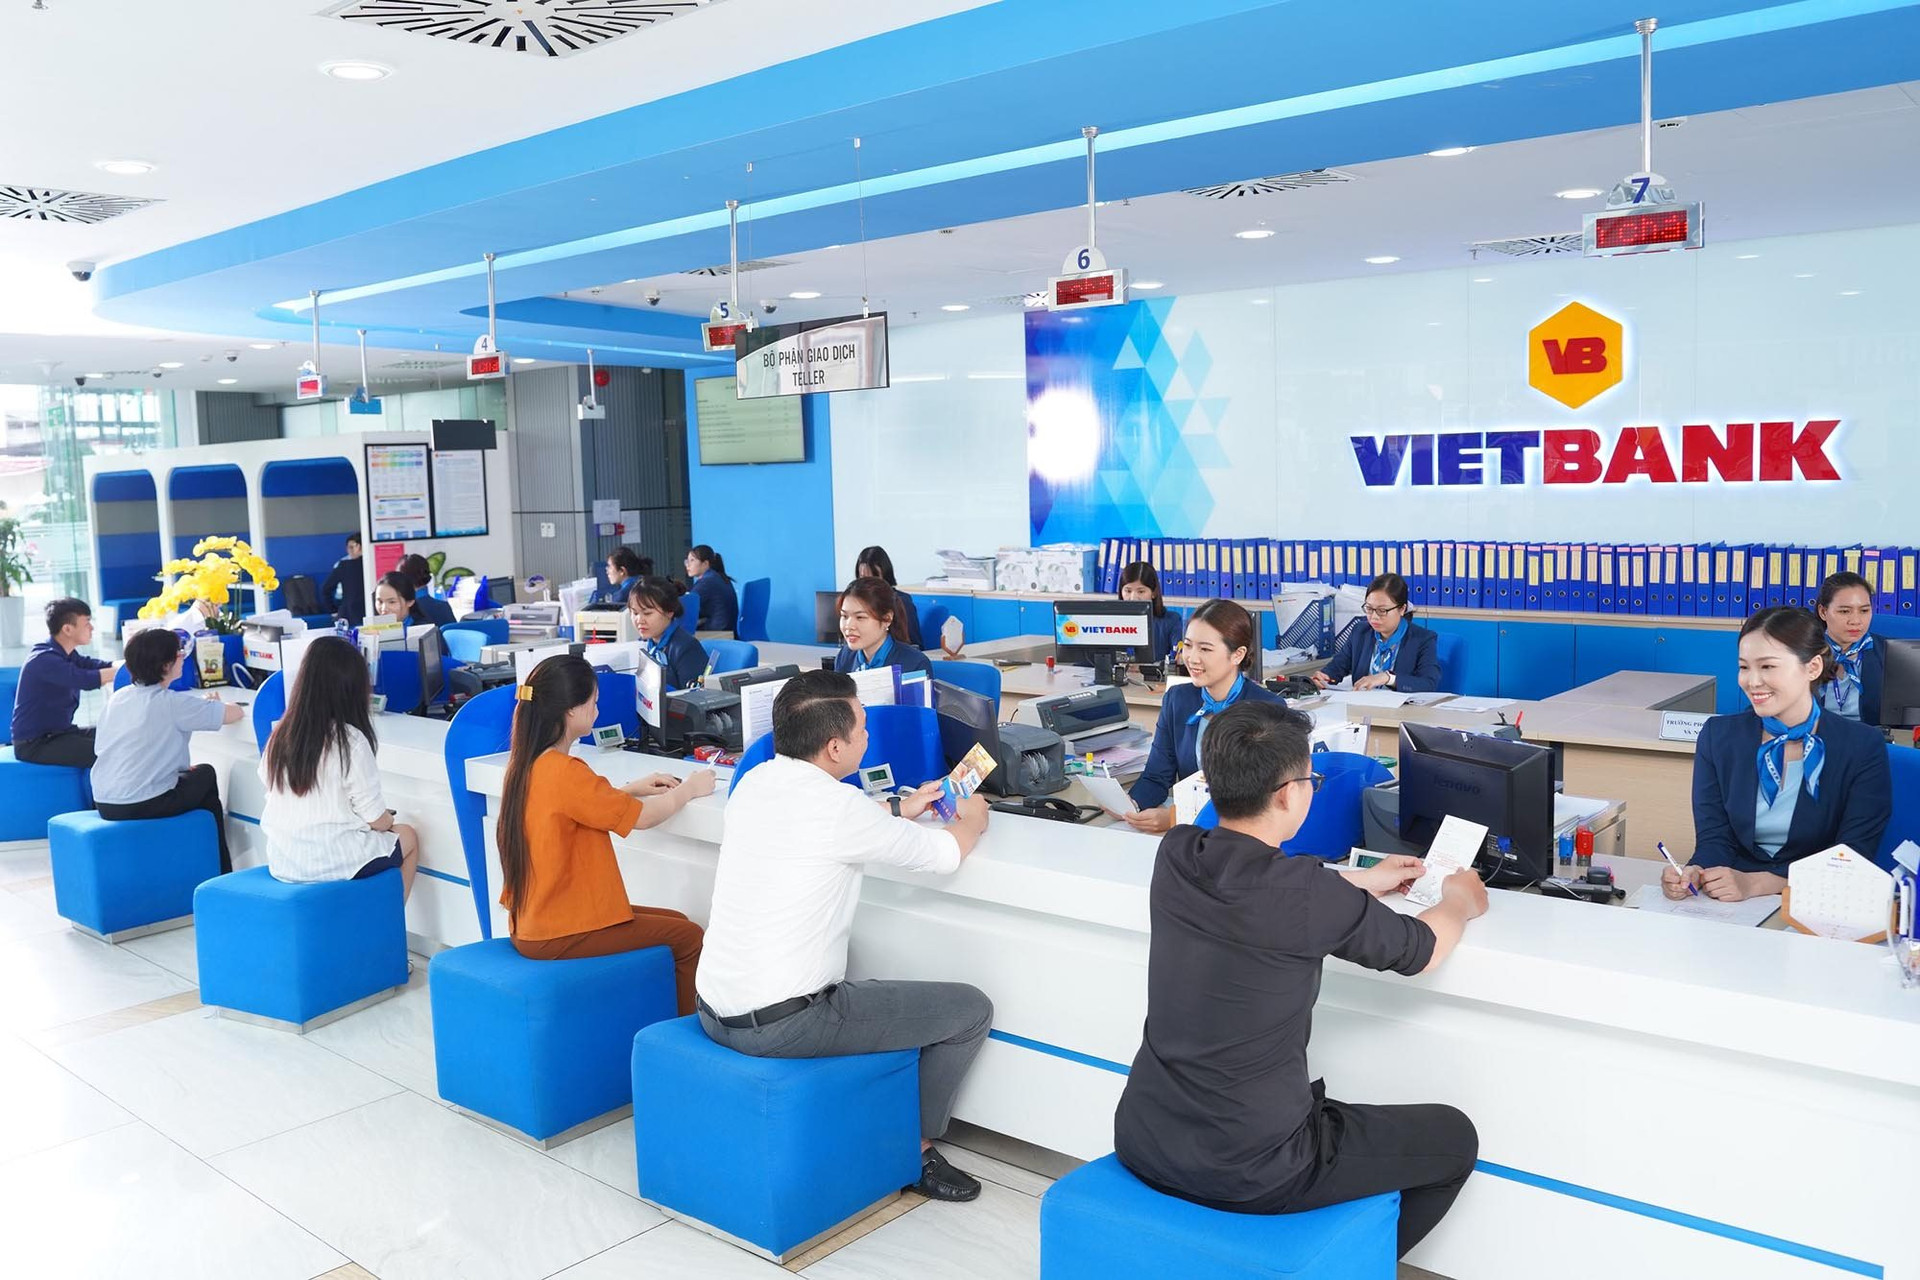 hinh-canh-giao-dich-vietbank.jpg